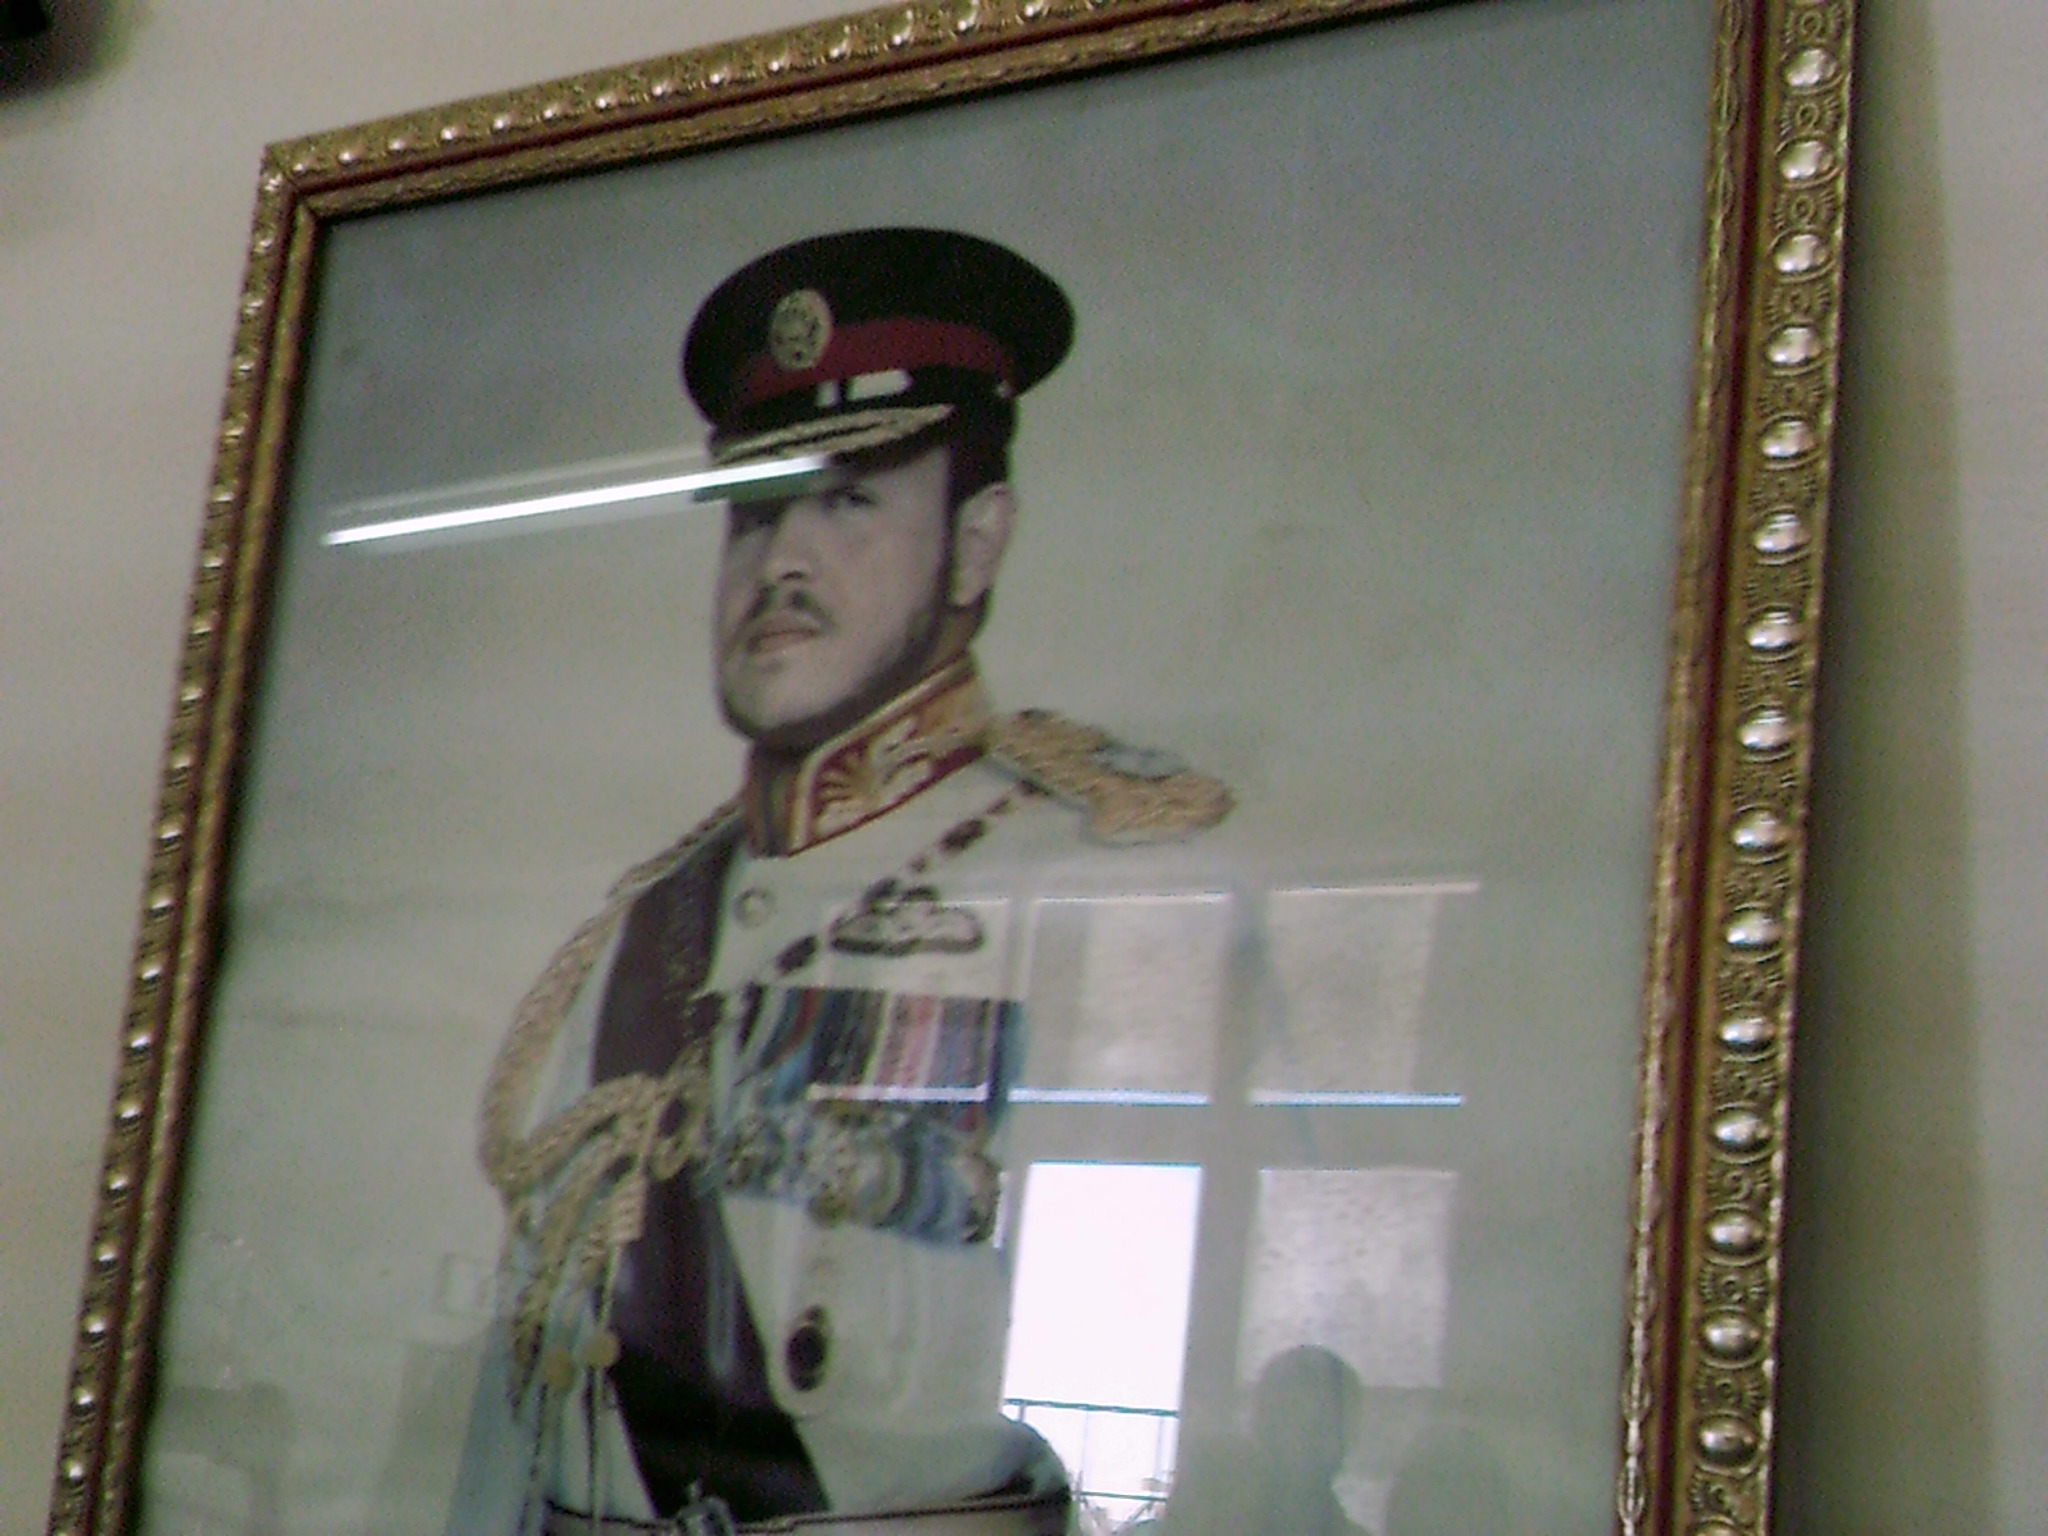 The King of Jordan, Abdullah II bin Al Hussein, is omnipresent in Jordan. This school is no exception: Paintings and photographs of the King are found at the school entrance, in the headmaster’s office, and in the library.